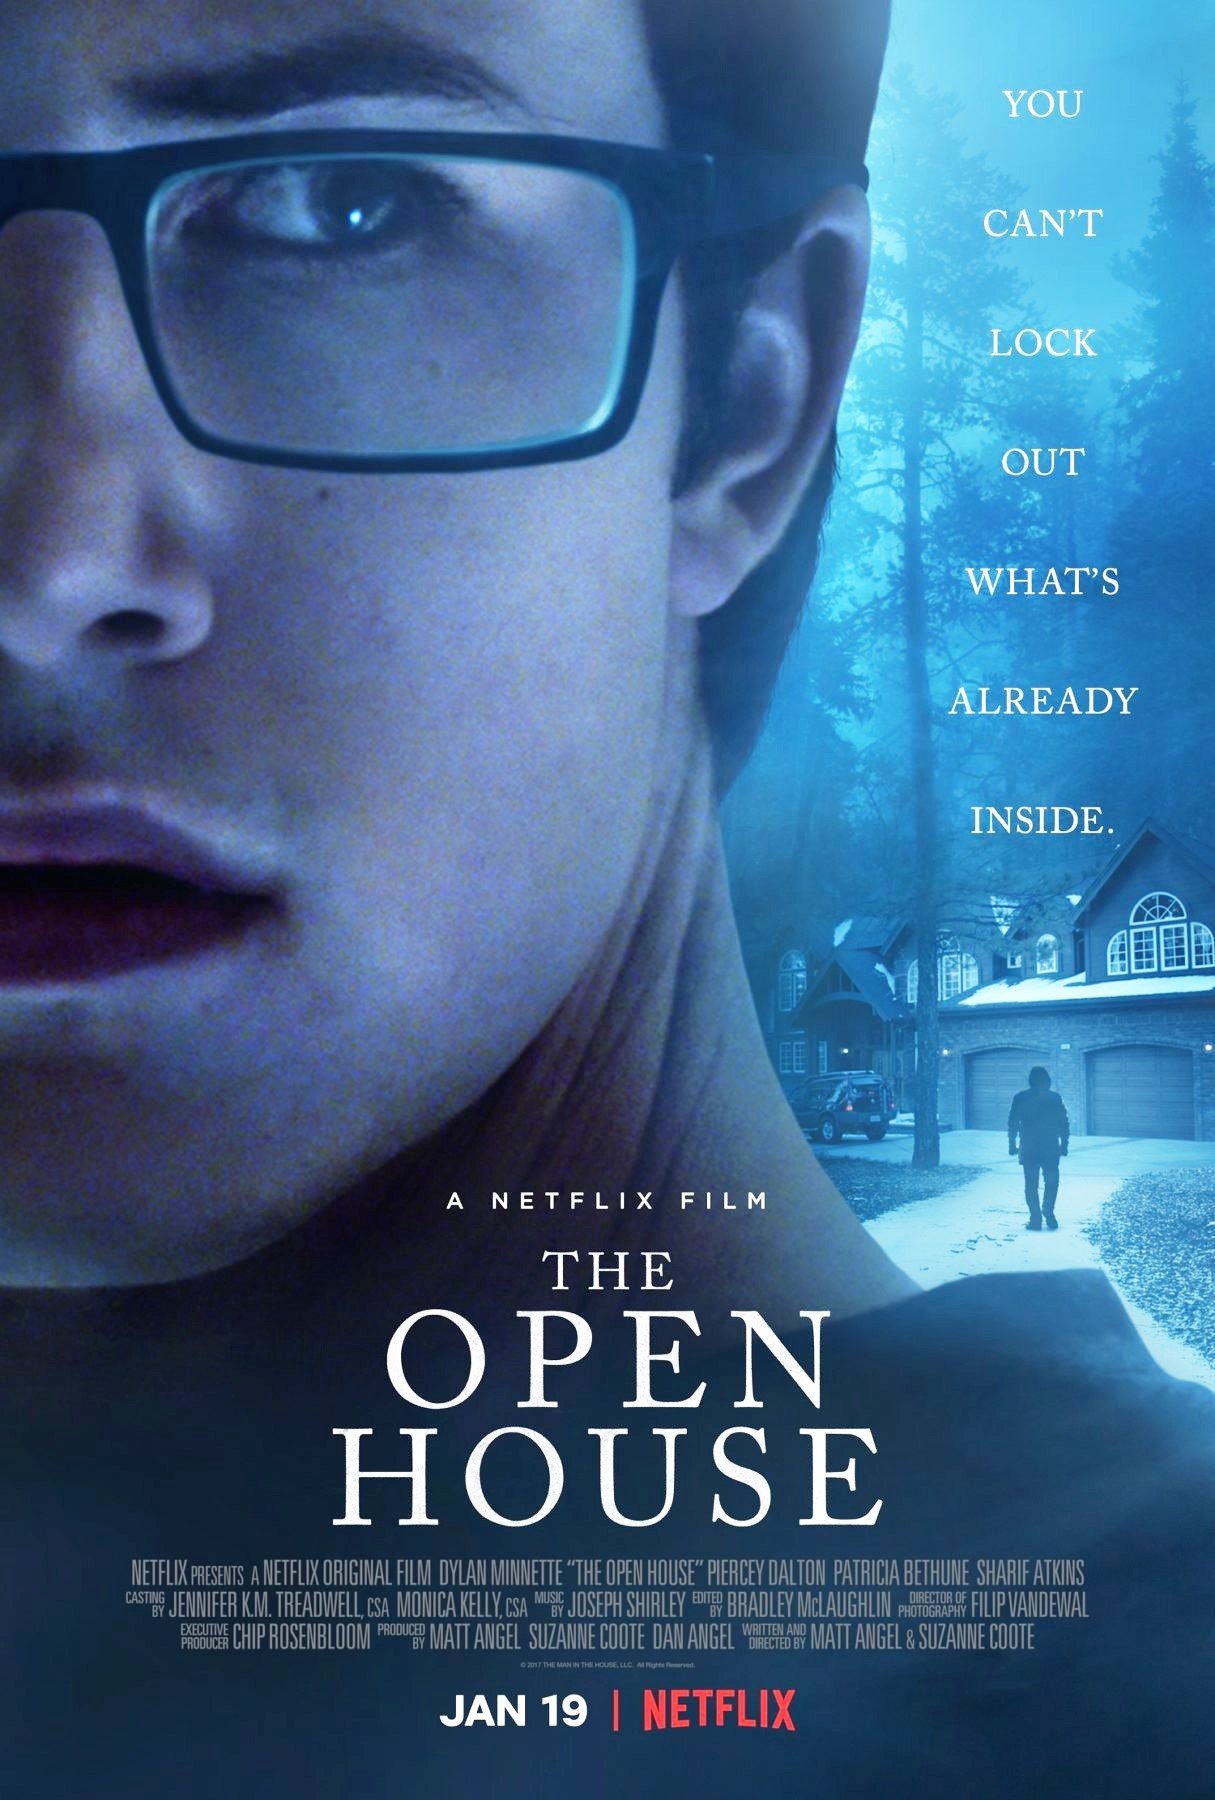 Poster of Netflix's The Open House (2018)